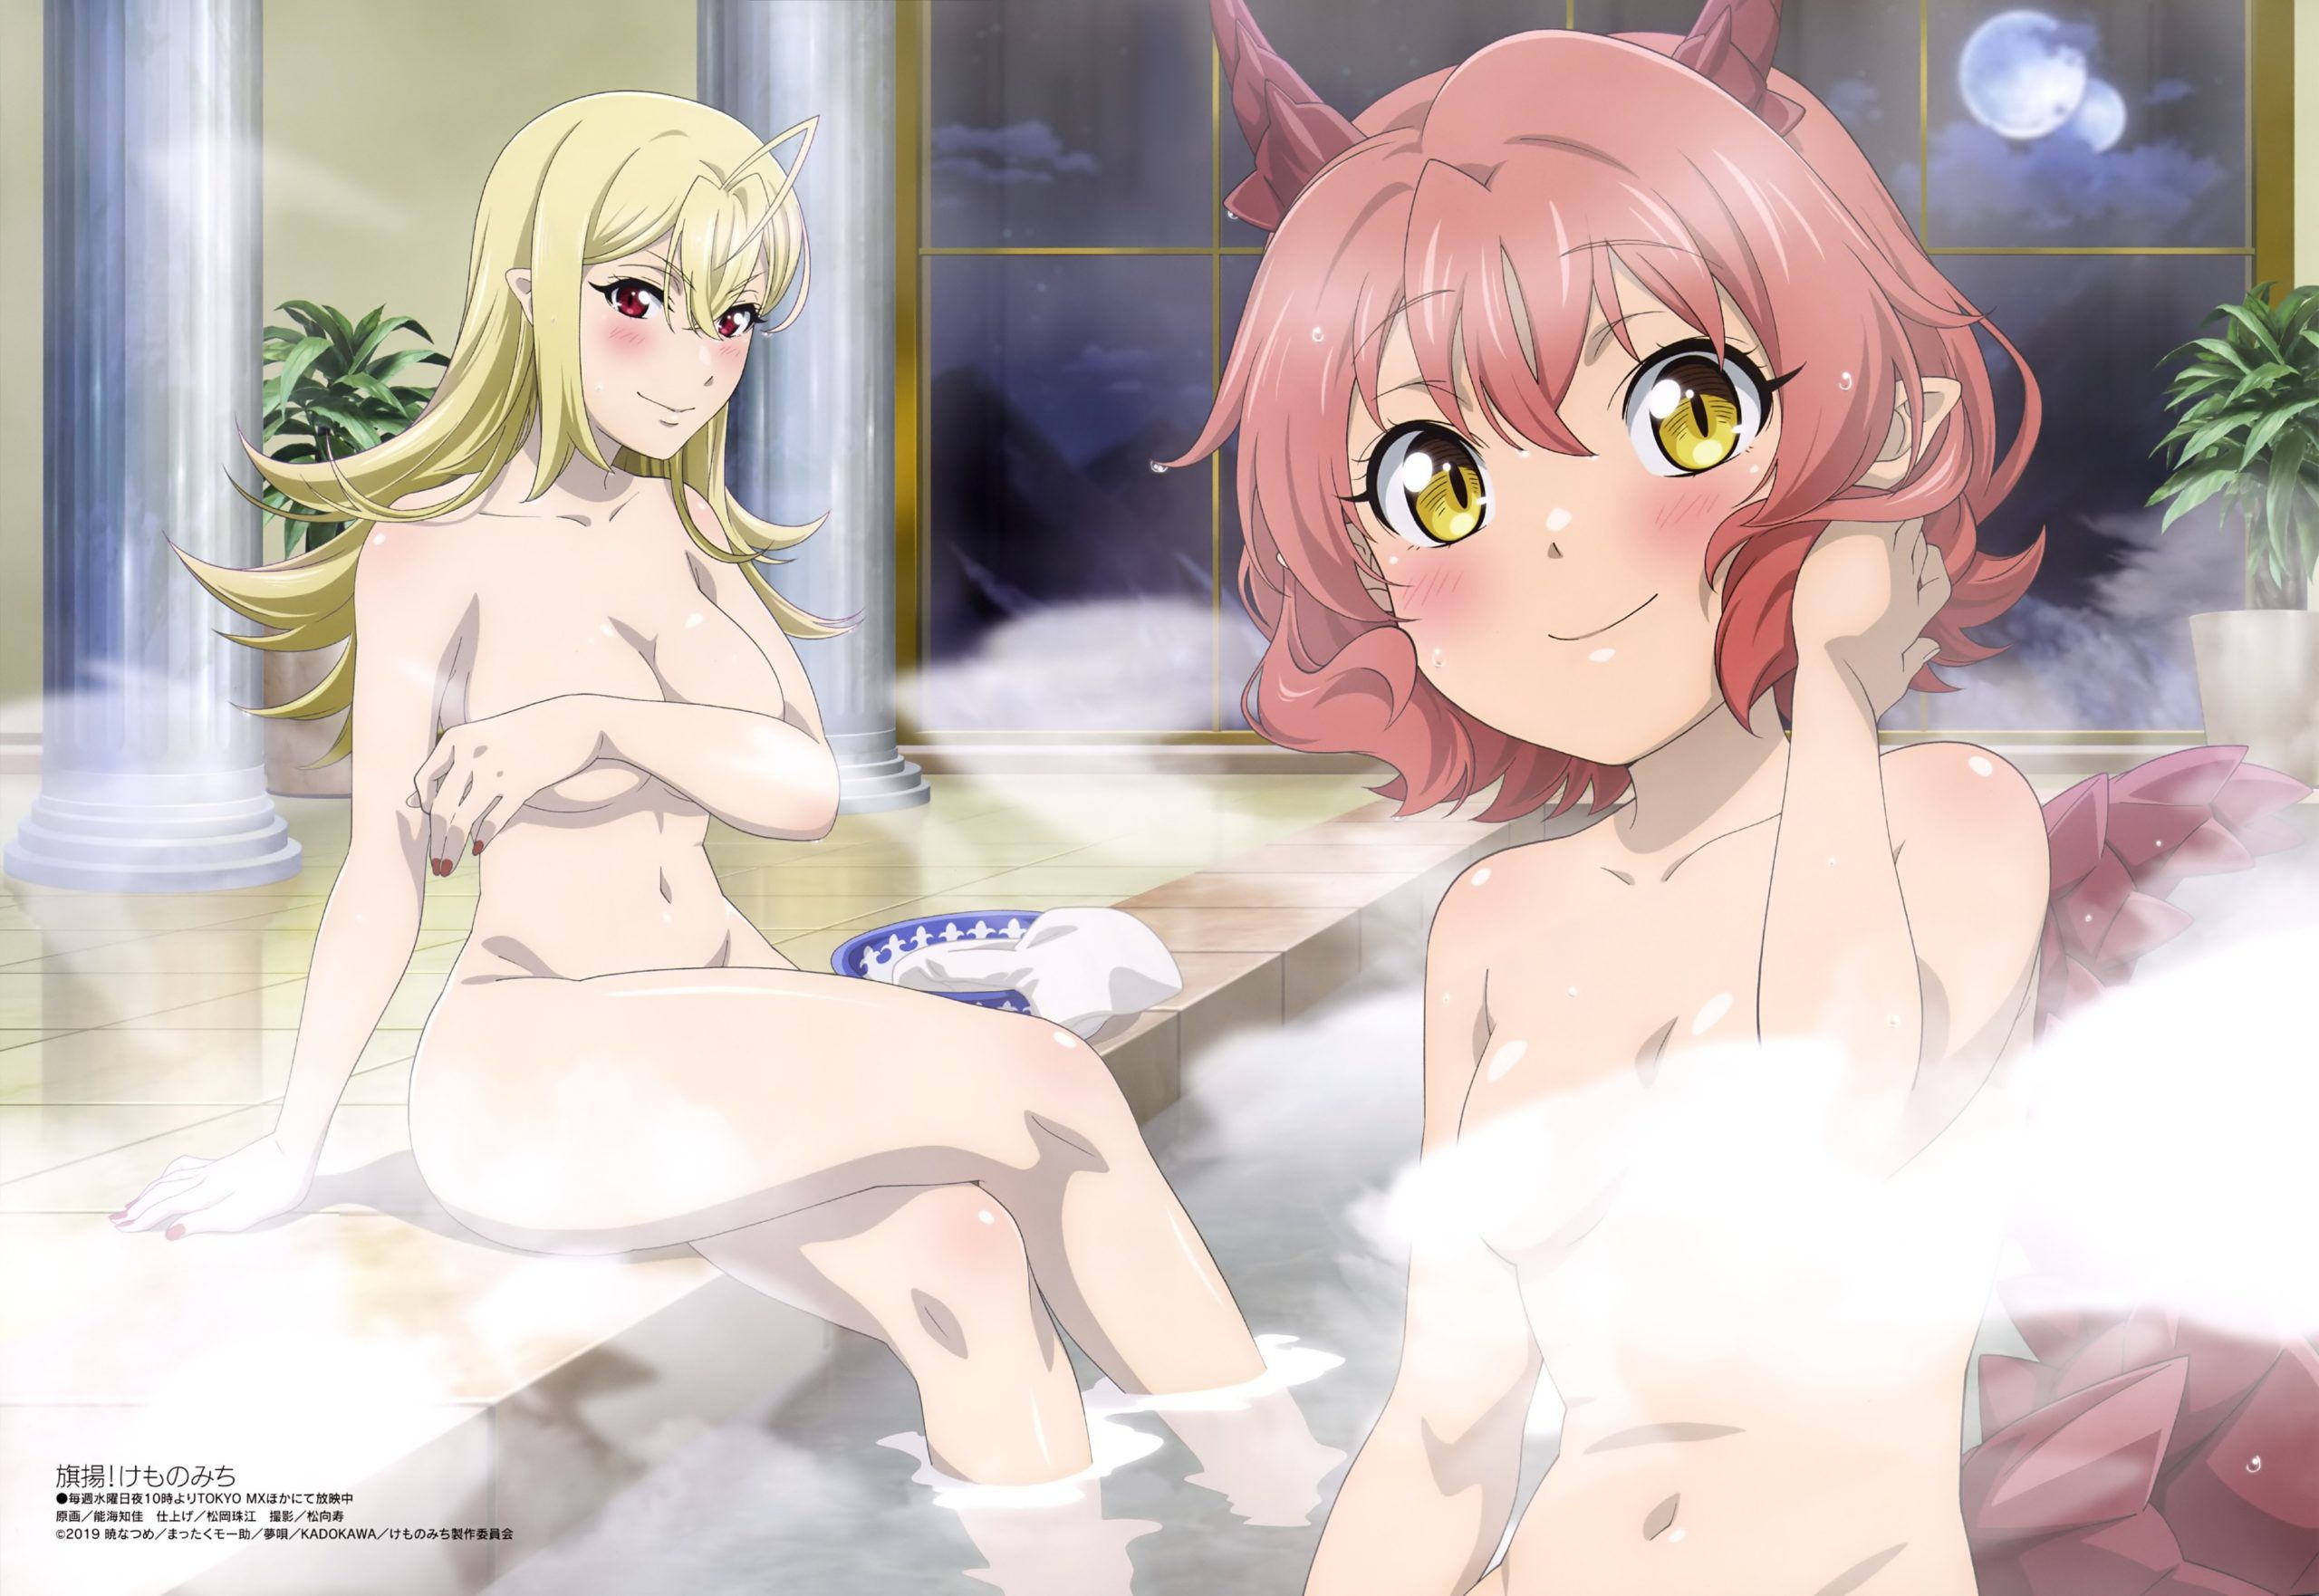 It's getting warmer and watch out for long baths! 2D erotic image of girl in bath 20